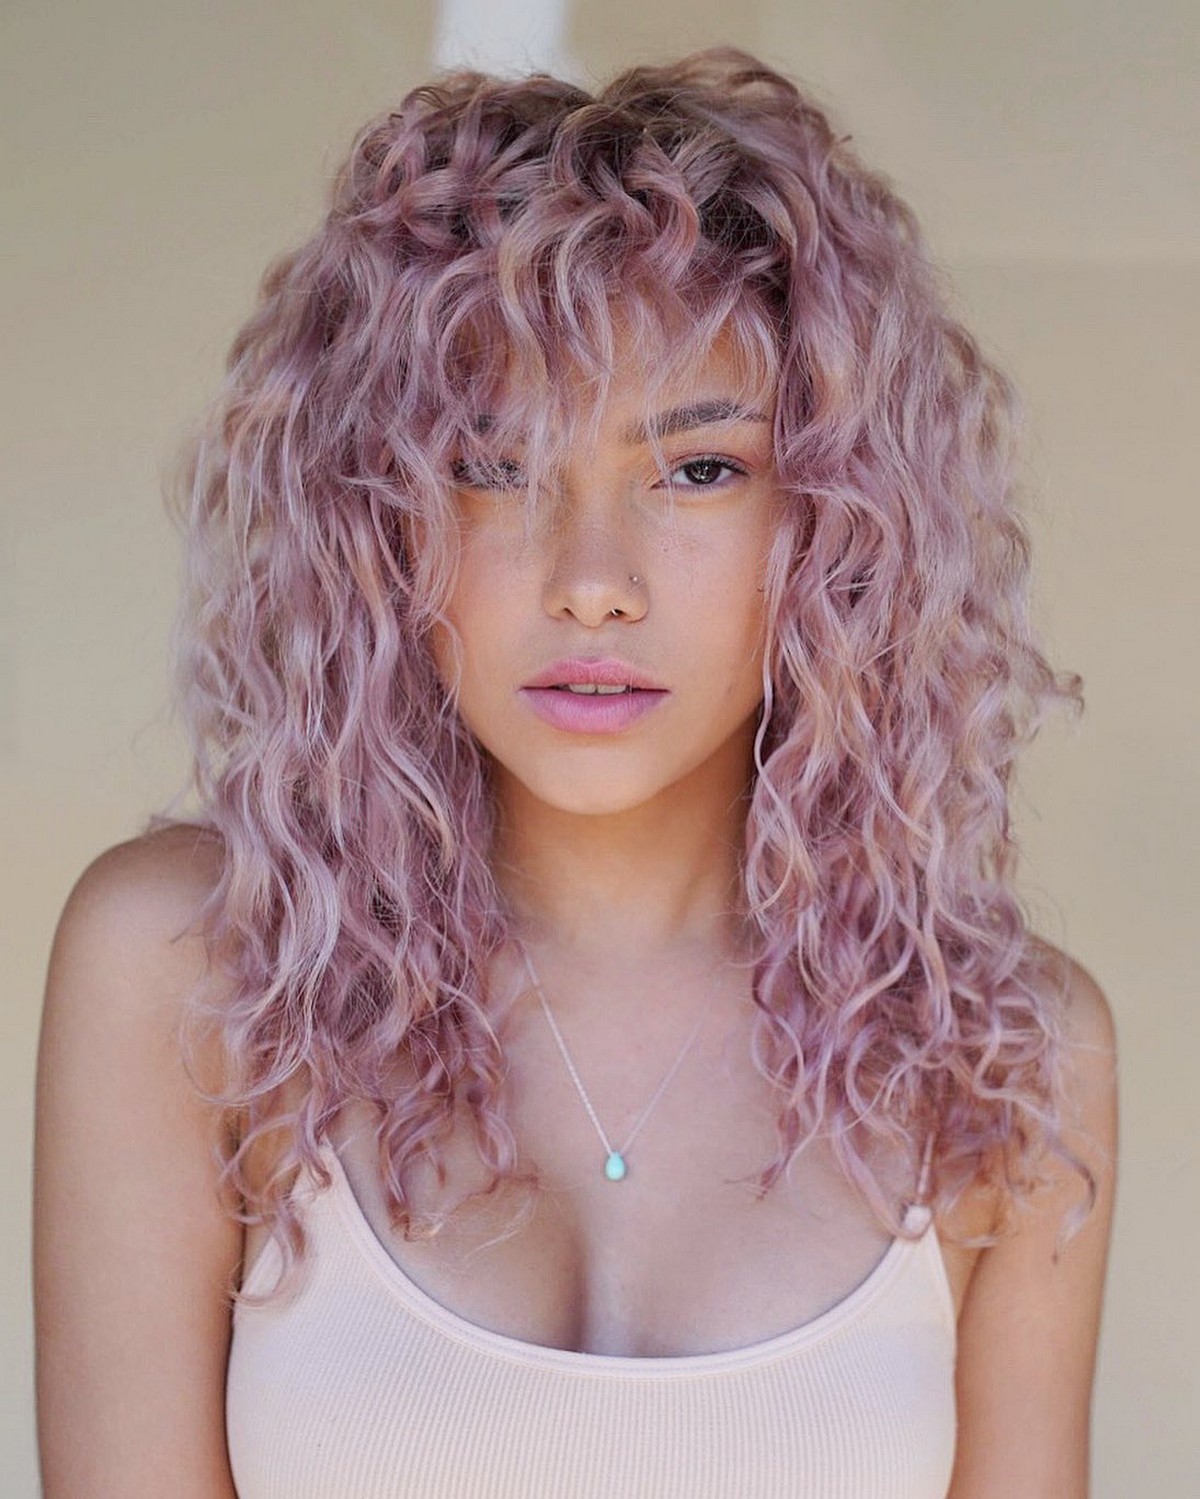 Curly Pink Hair